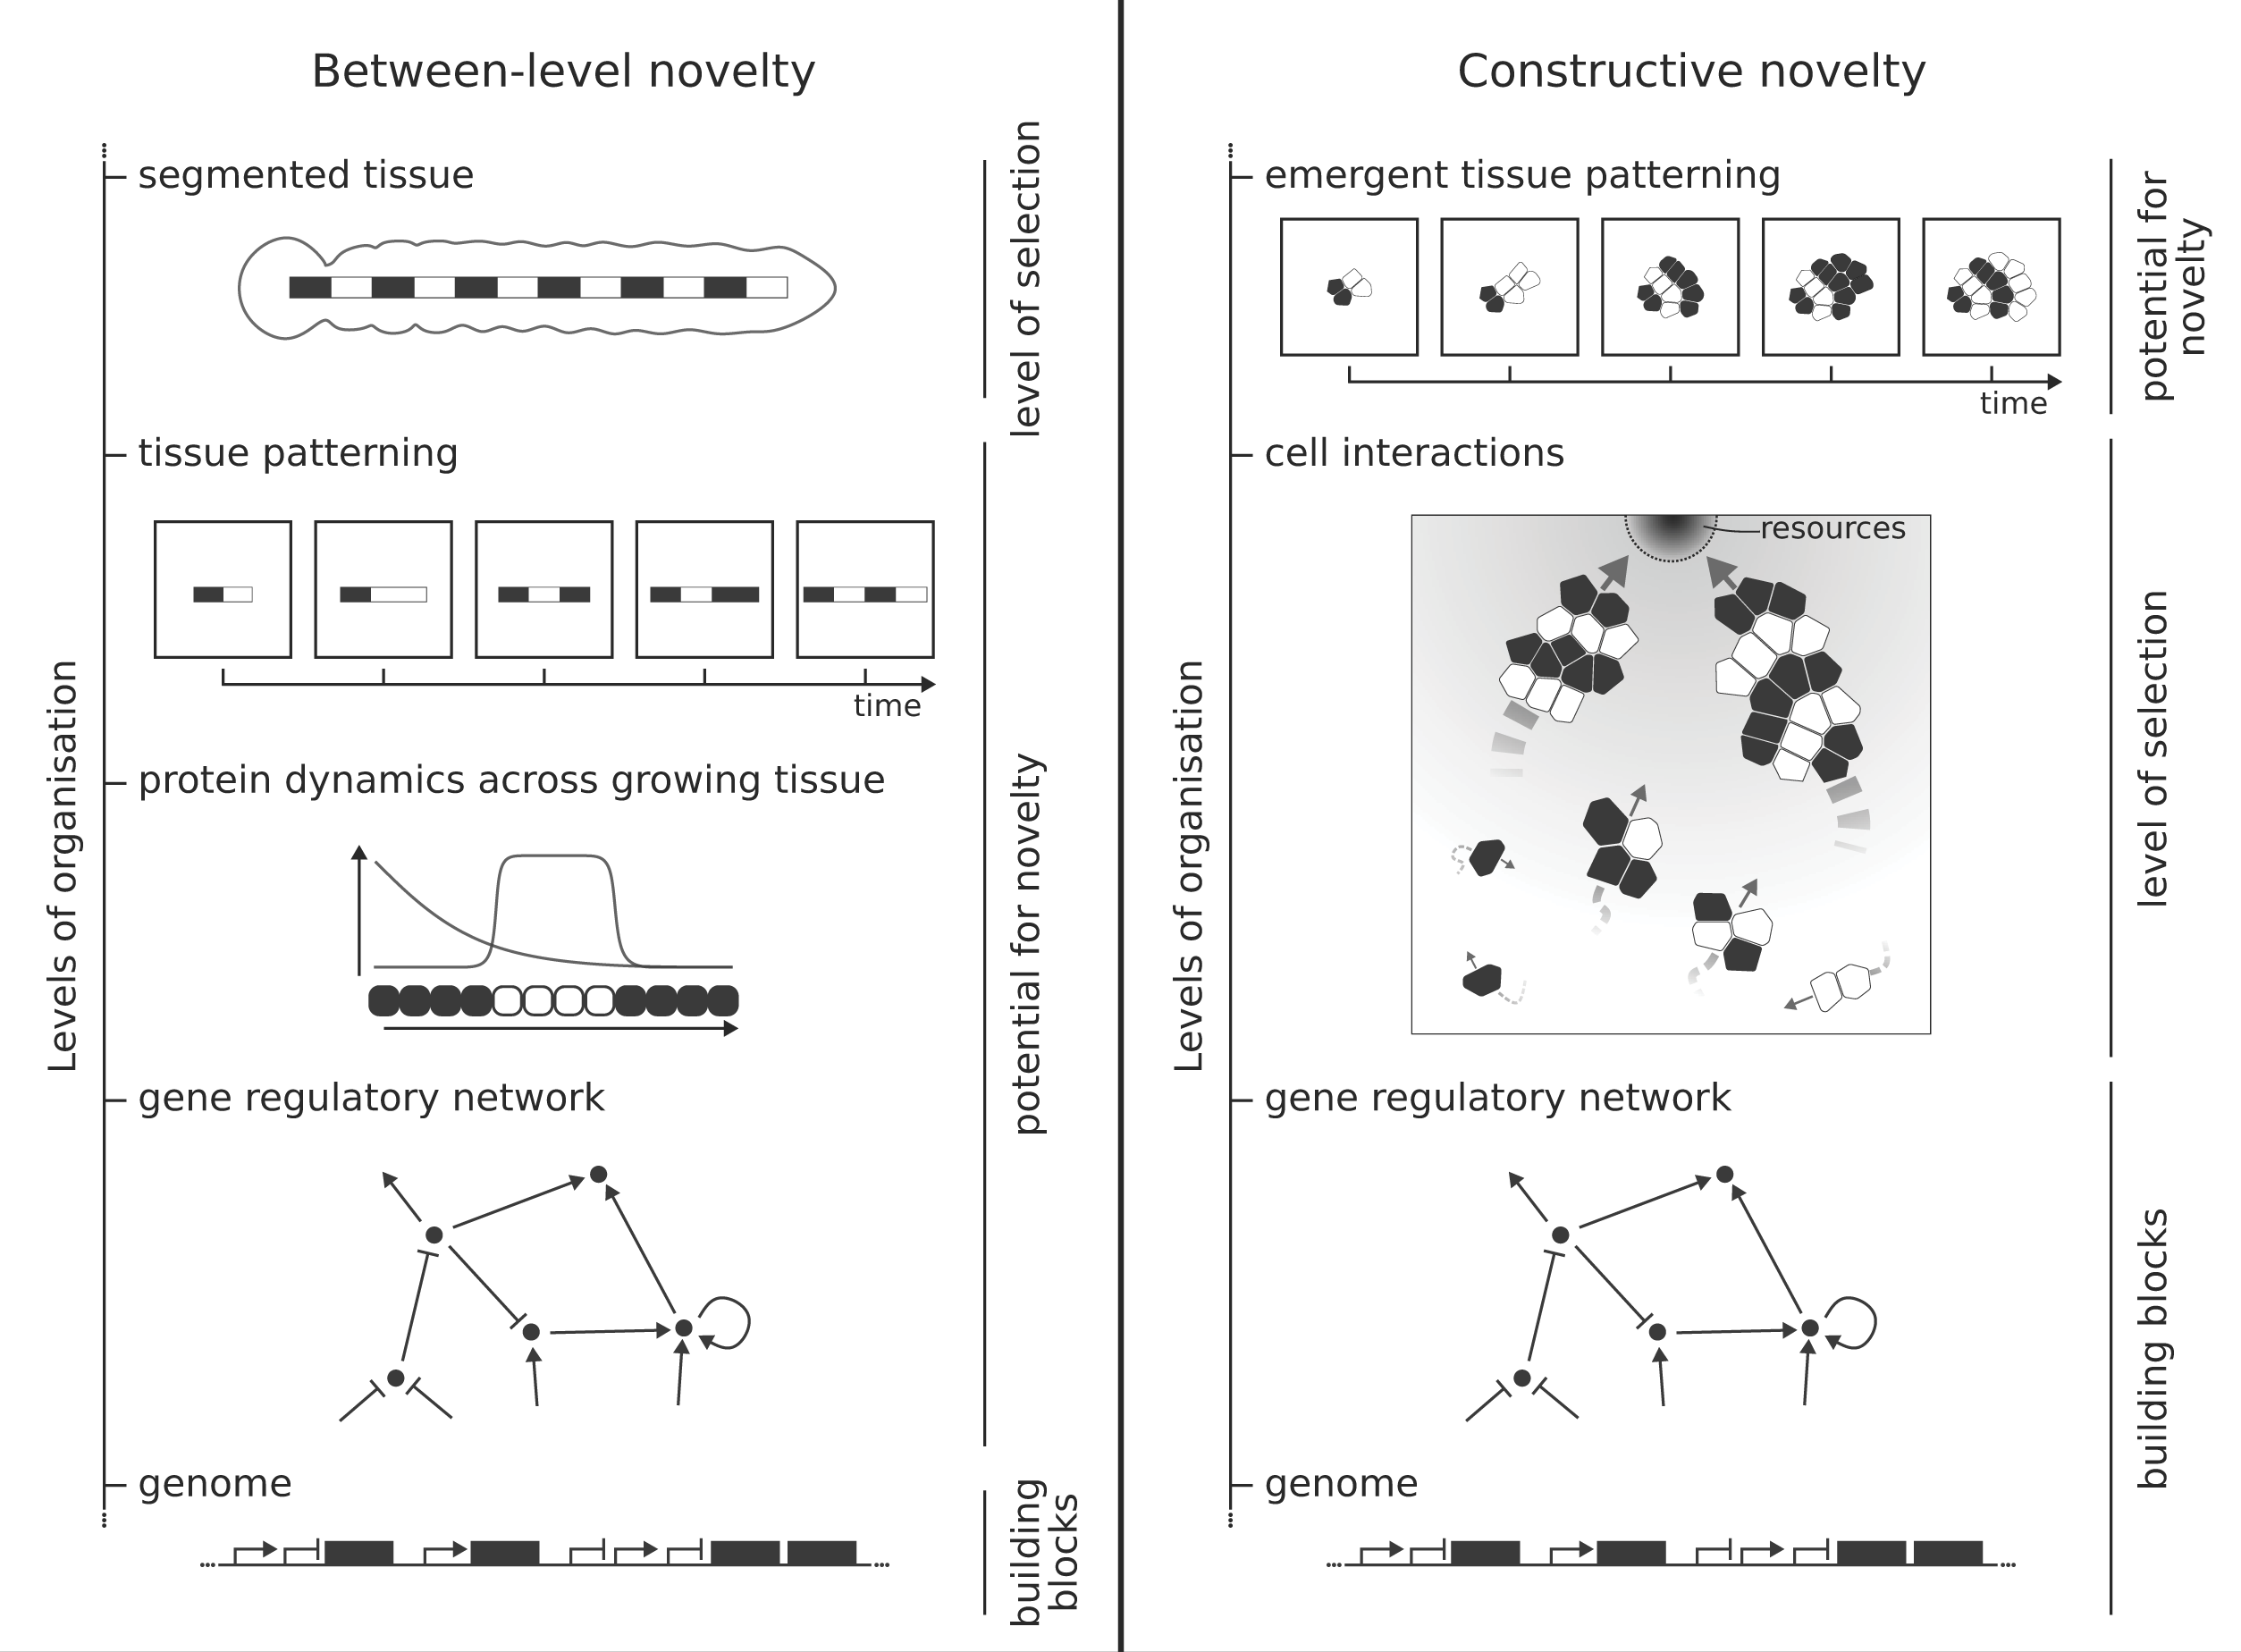 Graphic shows two forms of evolutionary novelty in computational models.